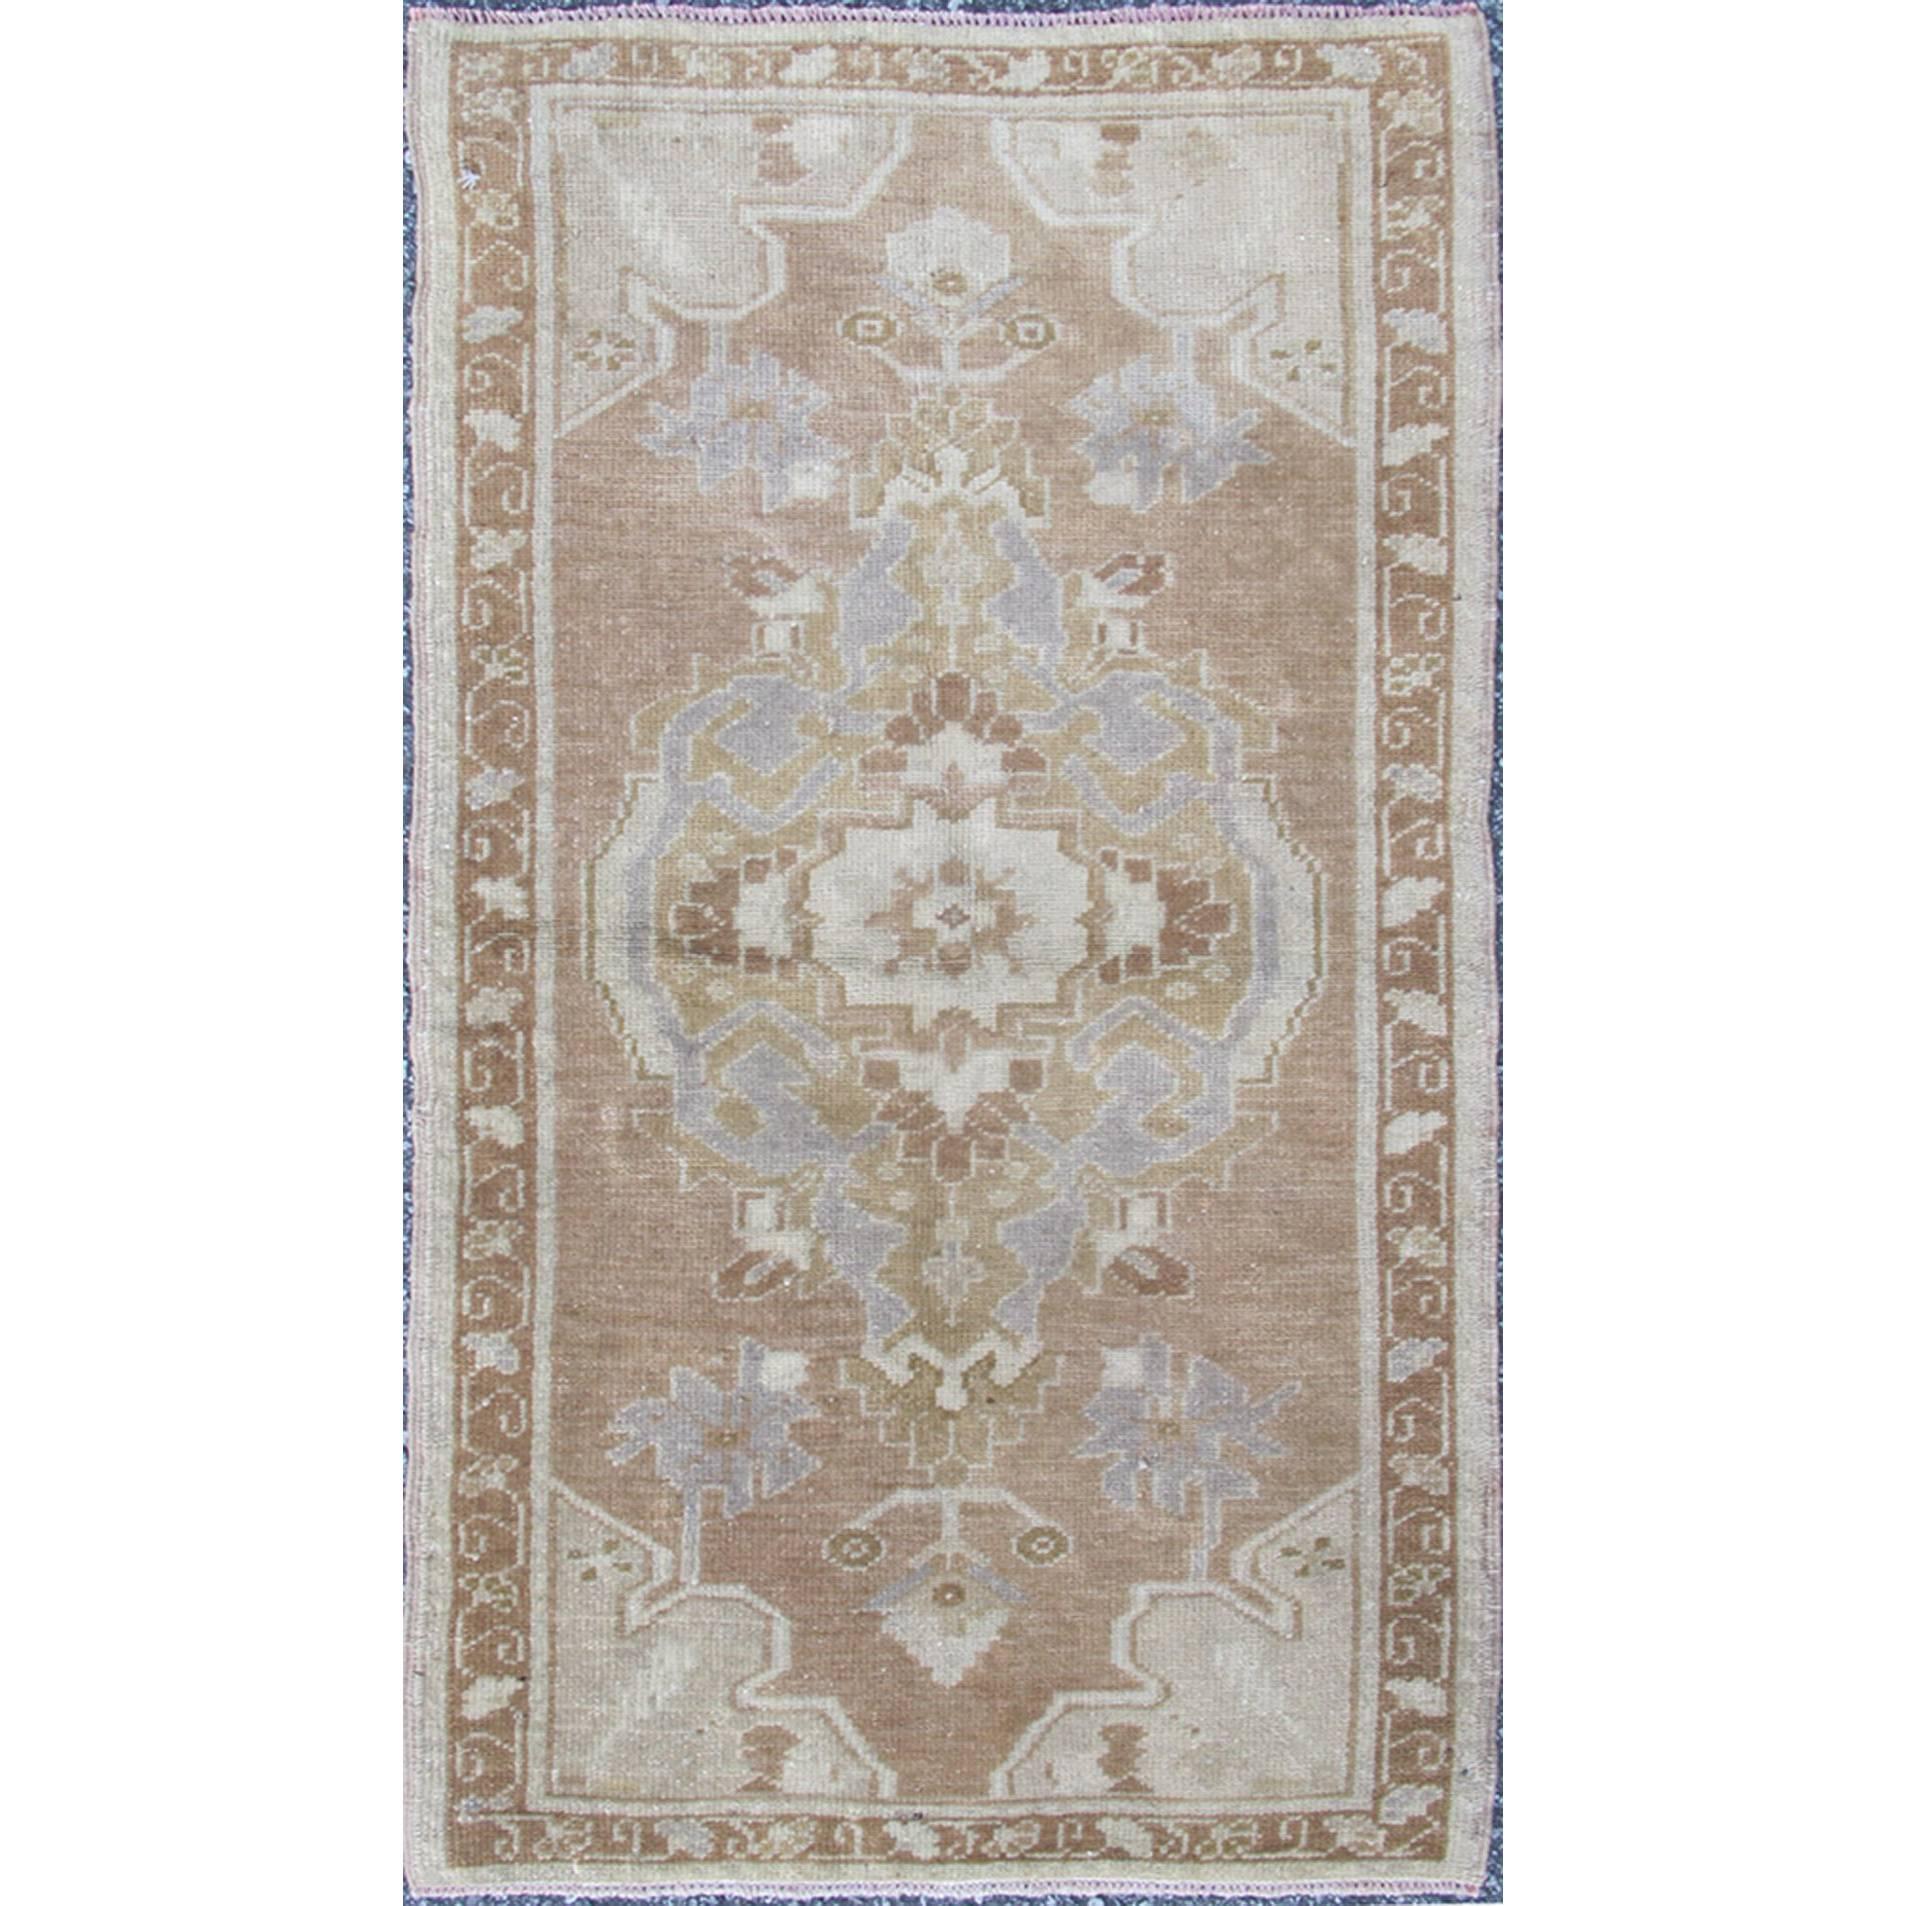 Vintage Turkish Oushak Rug with Central Medallion in Brown, Taupe, Ivory & Grey